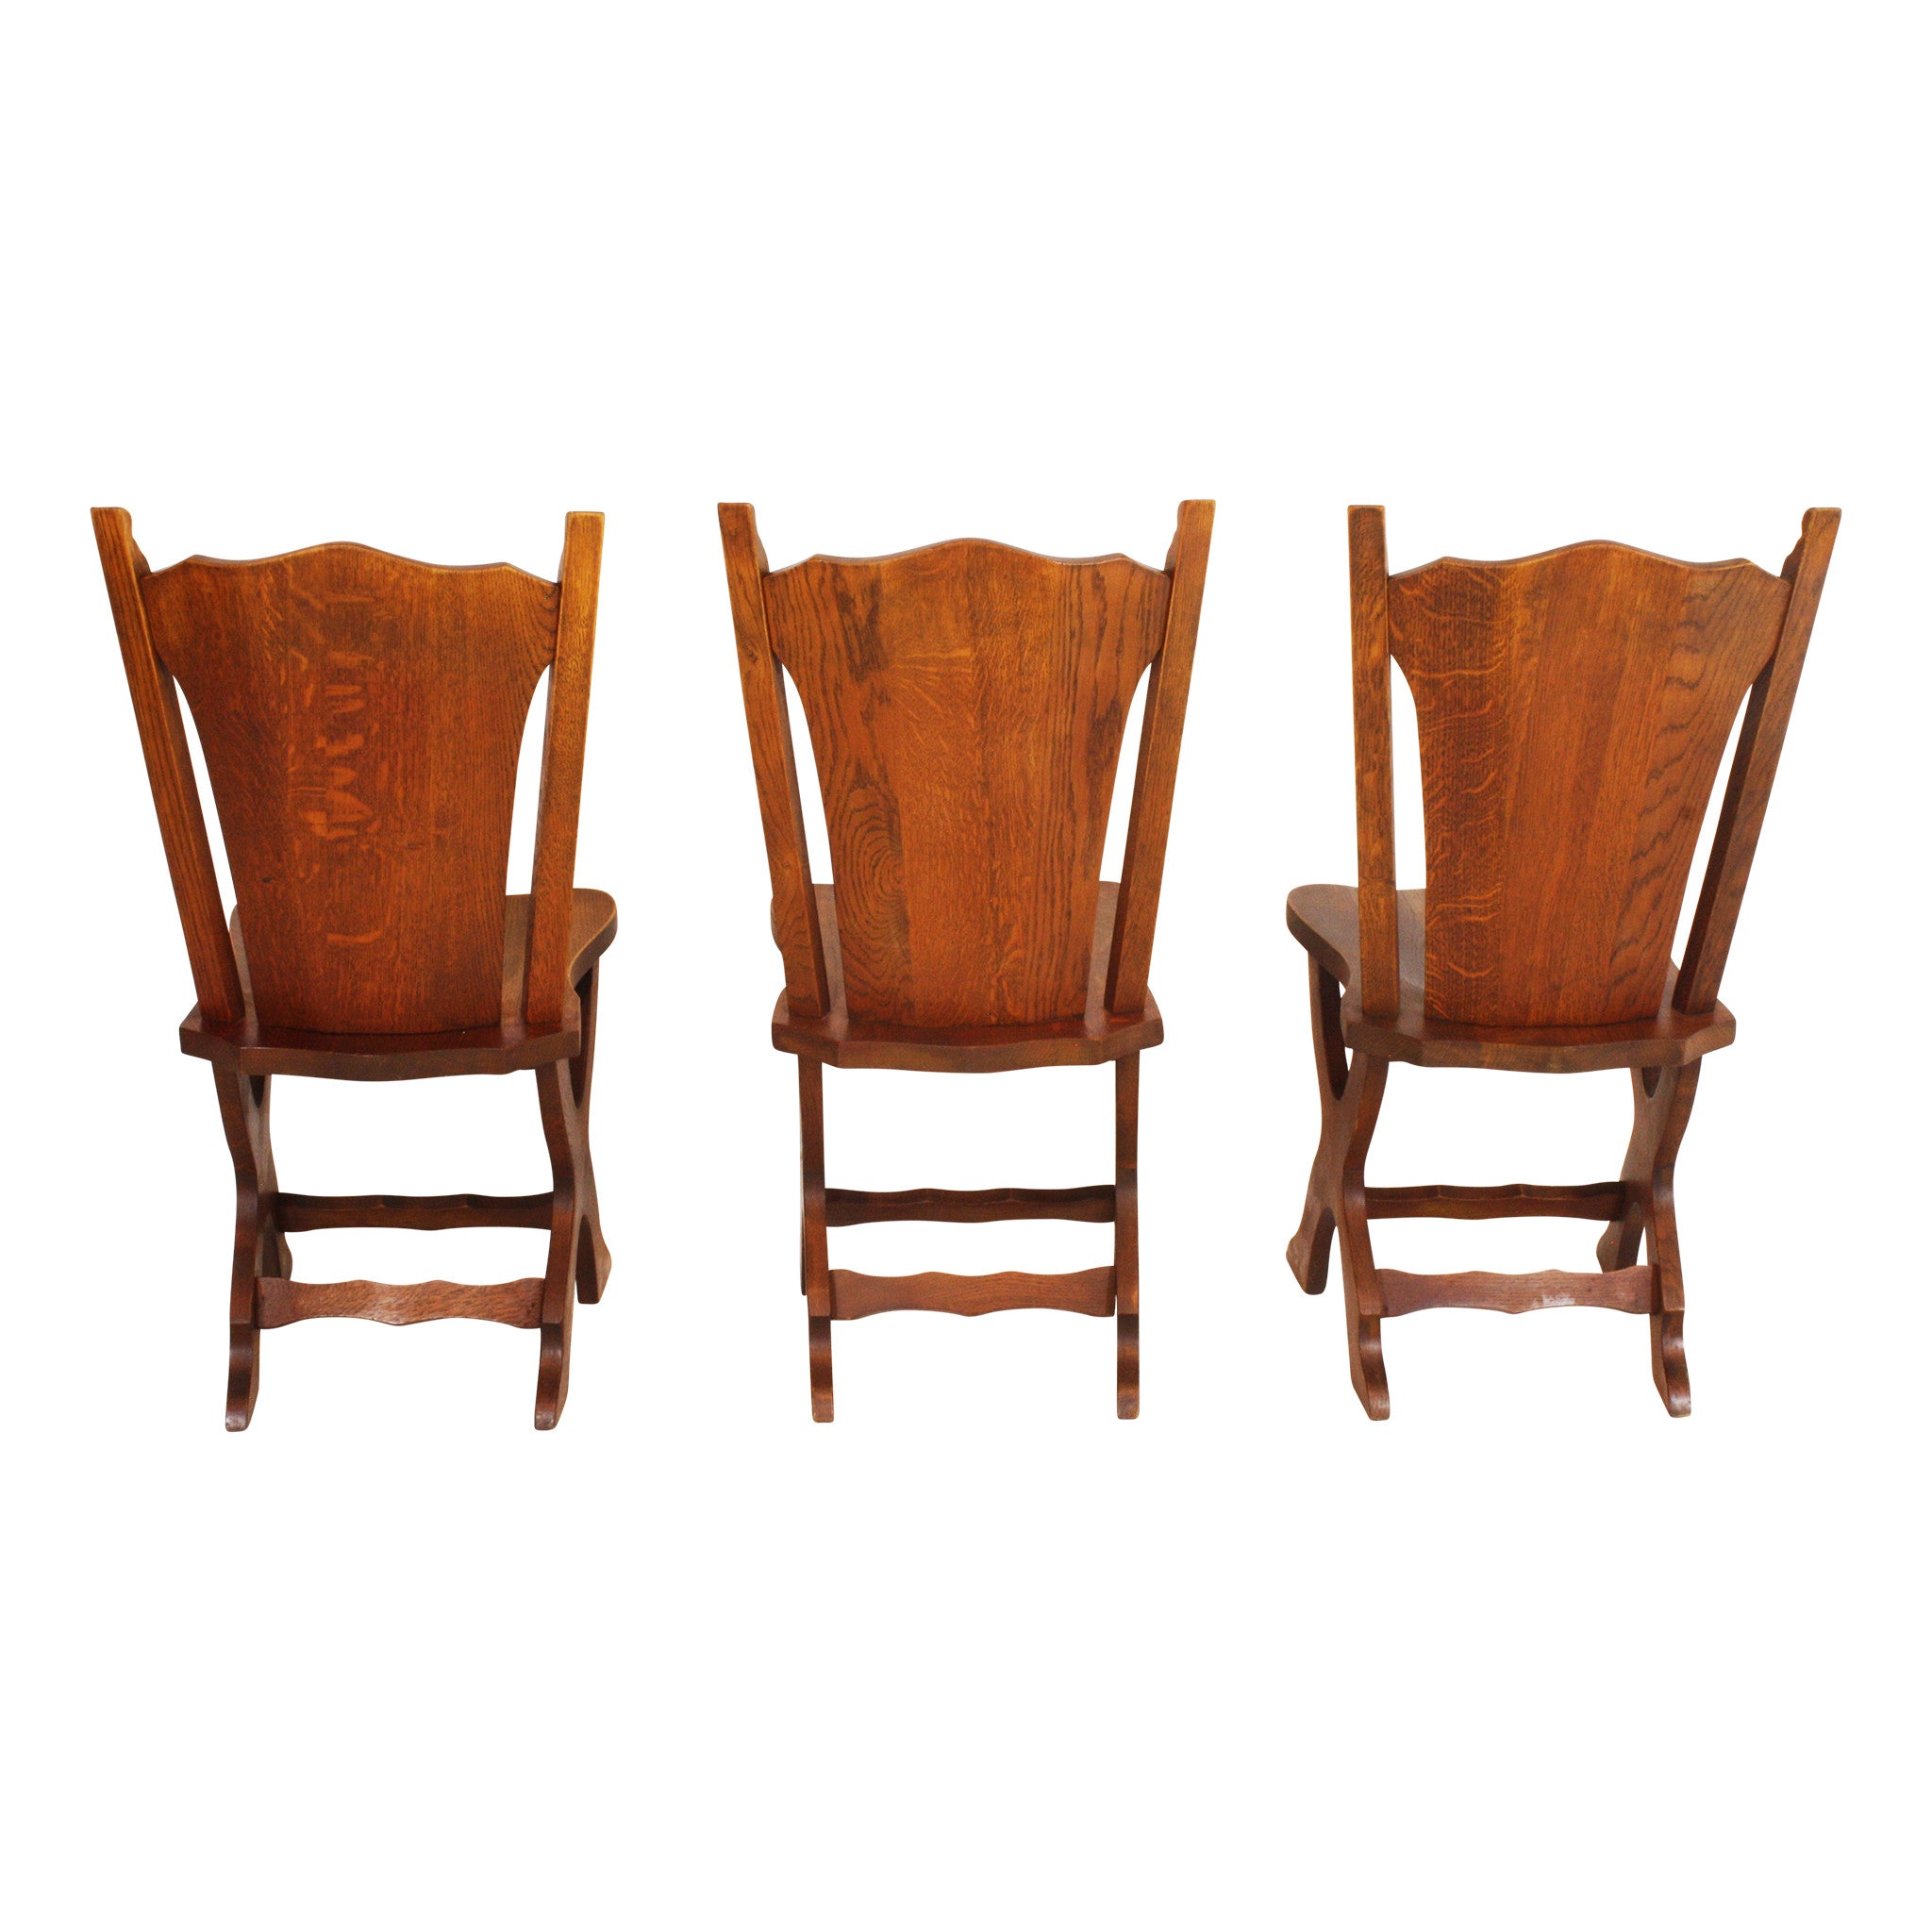 ski-country-antiques - Mountain Lodge Chairs - Set of 6